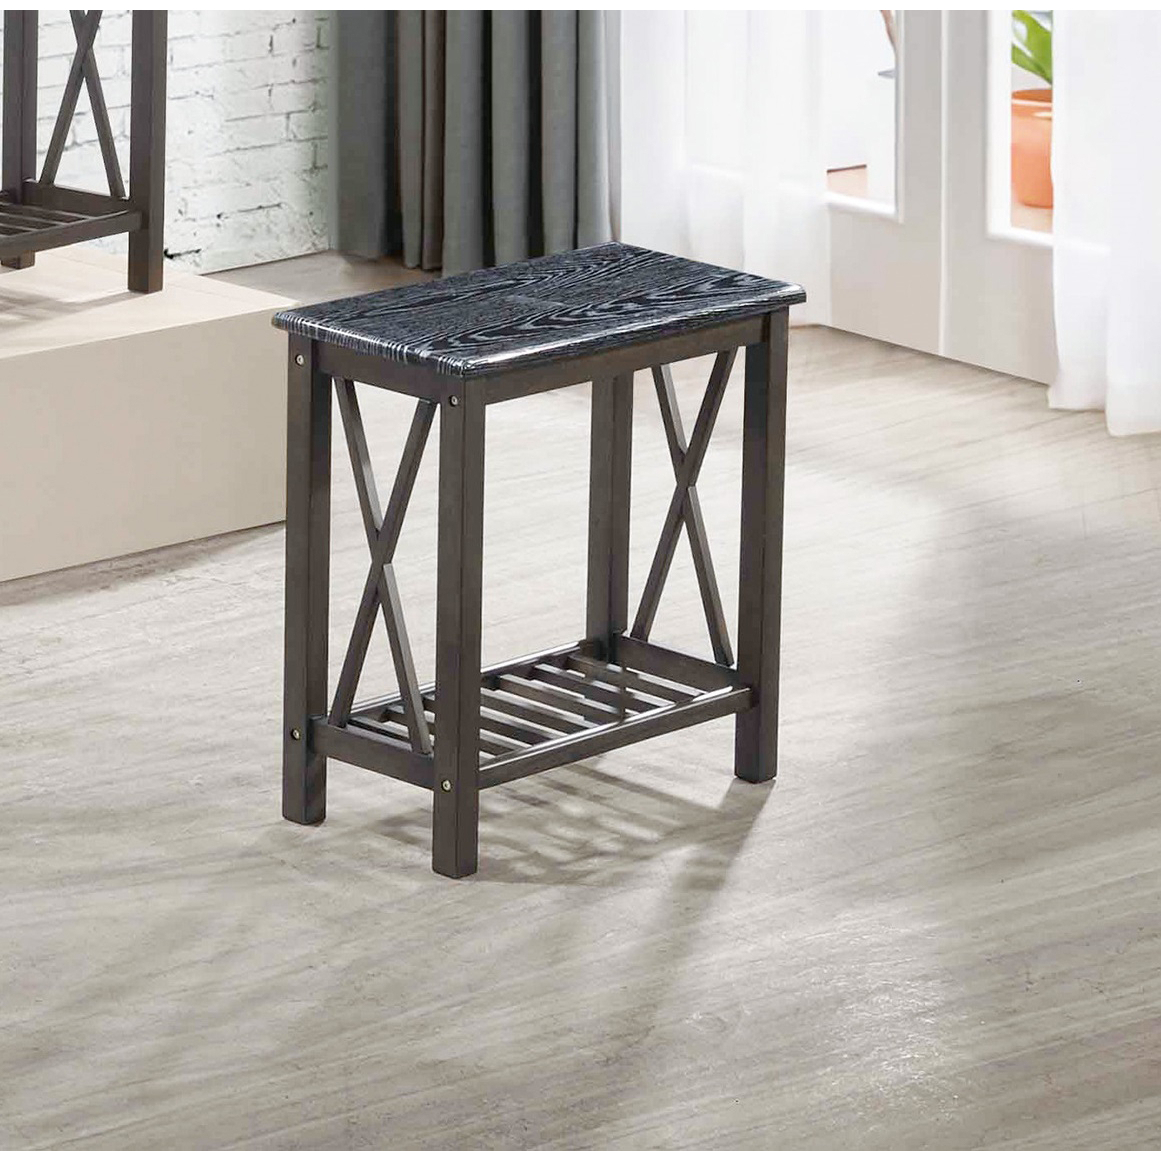 X-cross Side Table in Black and Grey